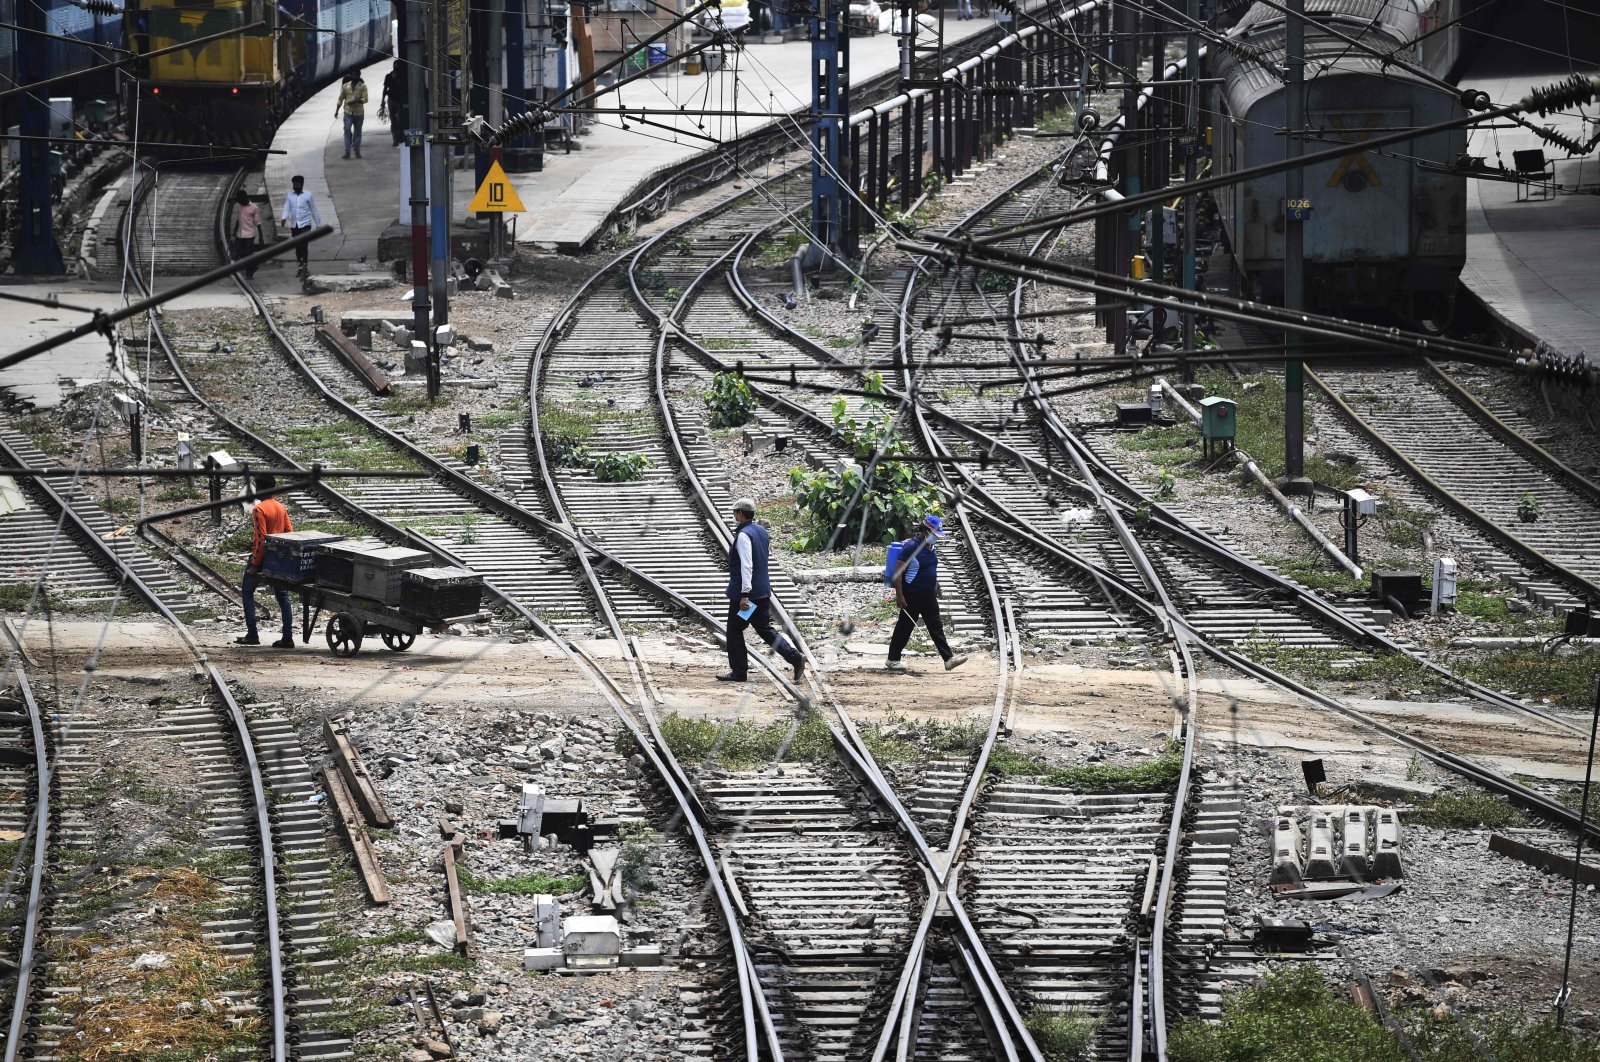 Commuters walk through the tracks at the railway station in New Delhi on May 11, 2020. (AFP Photo)